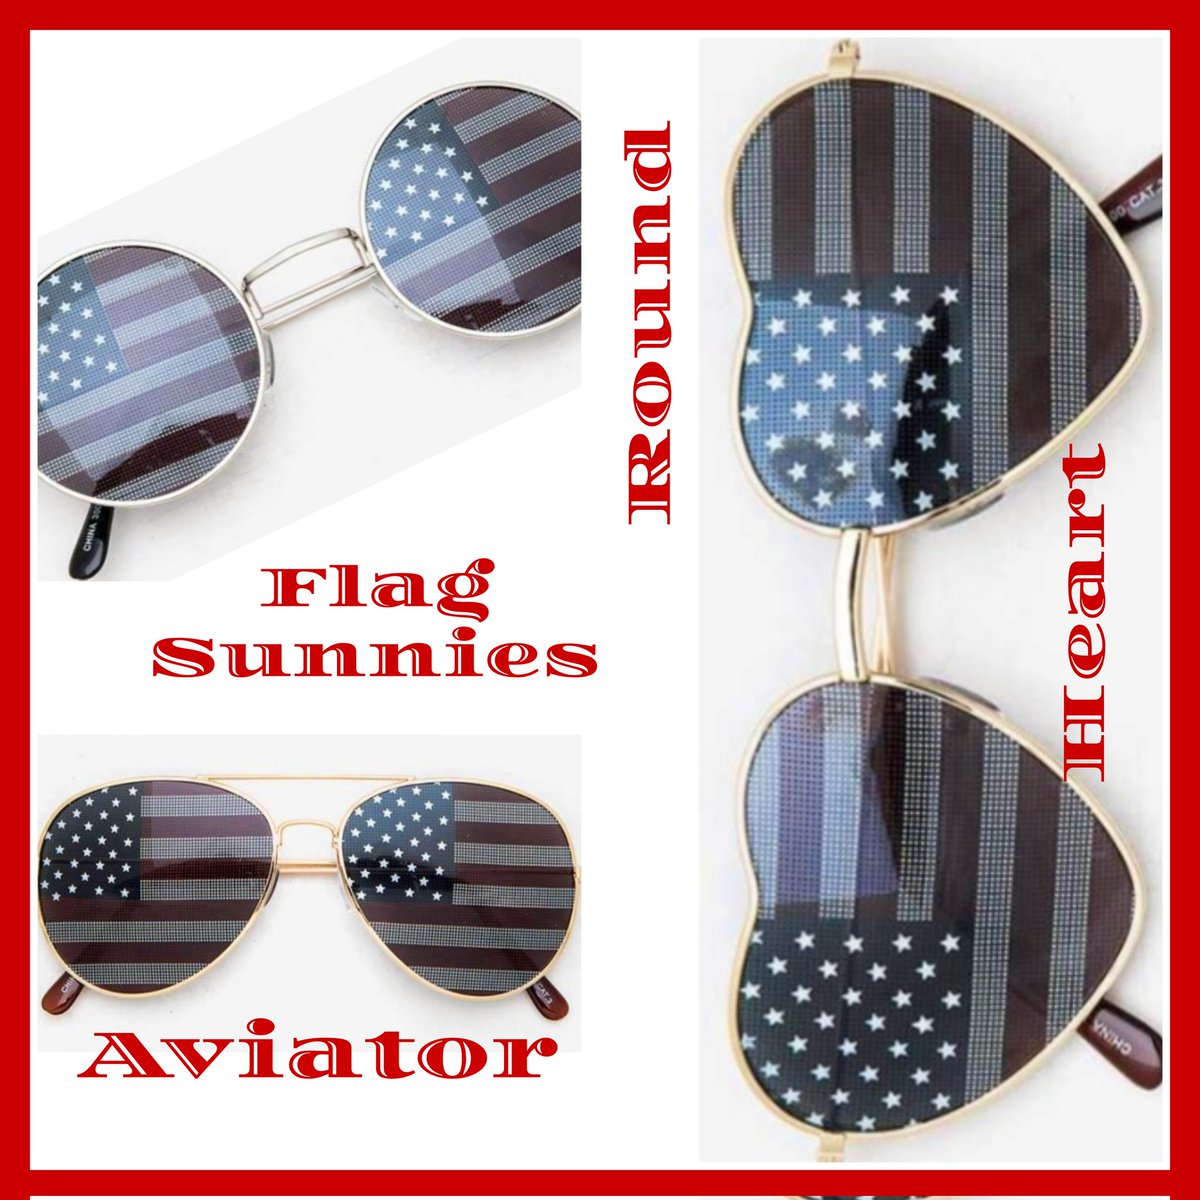 Which style is your favorite?!
❤🤍💙 #sunglasses #sunnies 
#flagsunnies #fourthofjuly #style 
#onlineboutiques #boutique 
#accessories #Fashionista #shop 
#FridayVibes #followfriday #outfit 
#briluvsbags